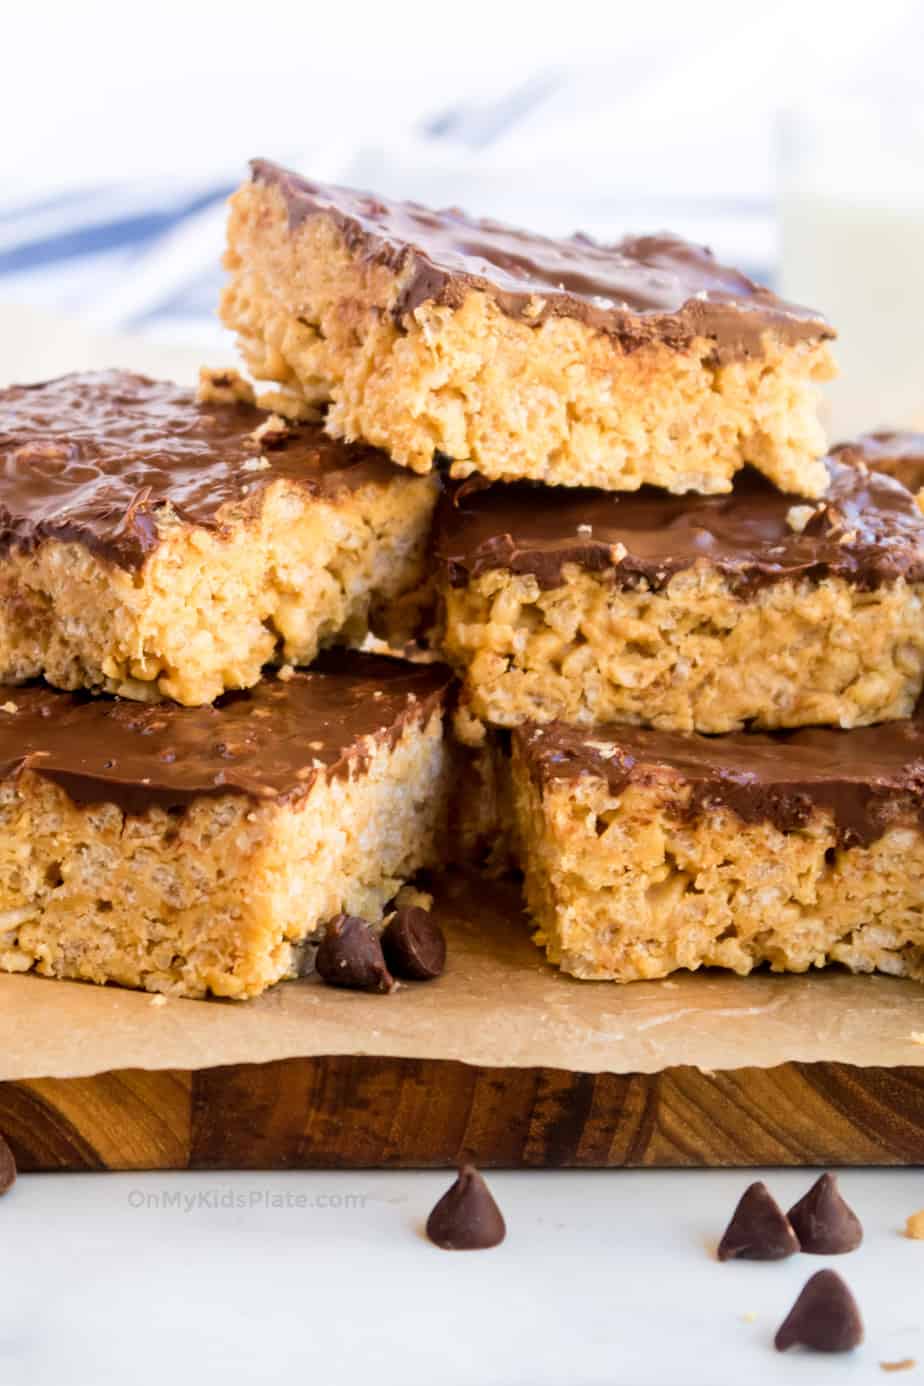 Peanut butter chocolate rice krispie treats stacked three high on a cutting board.